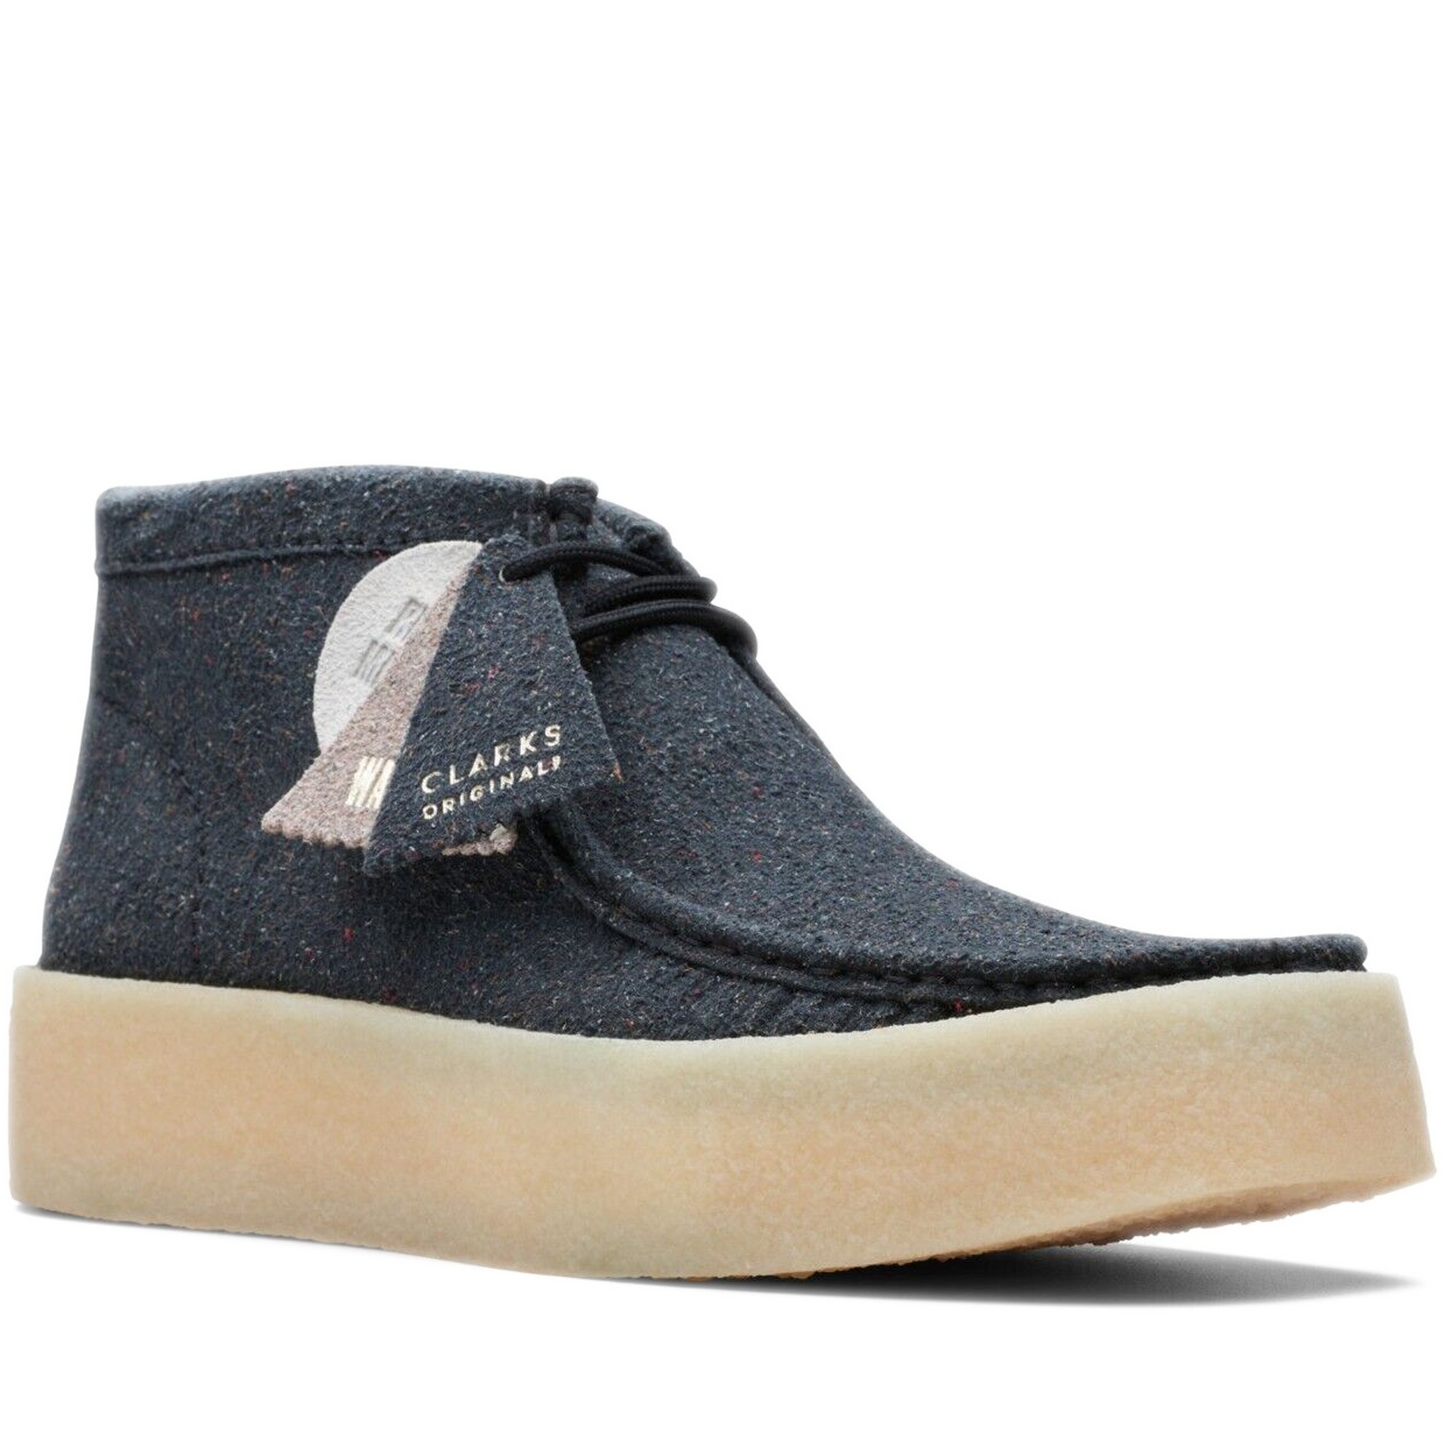 Men's Clarks Wallabee Cup - Black Eco Leather